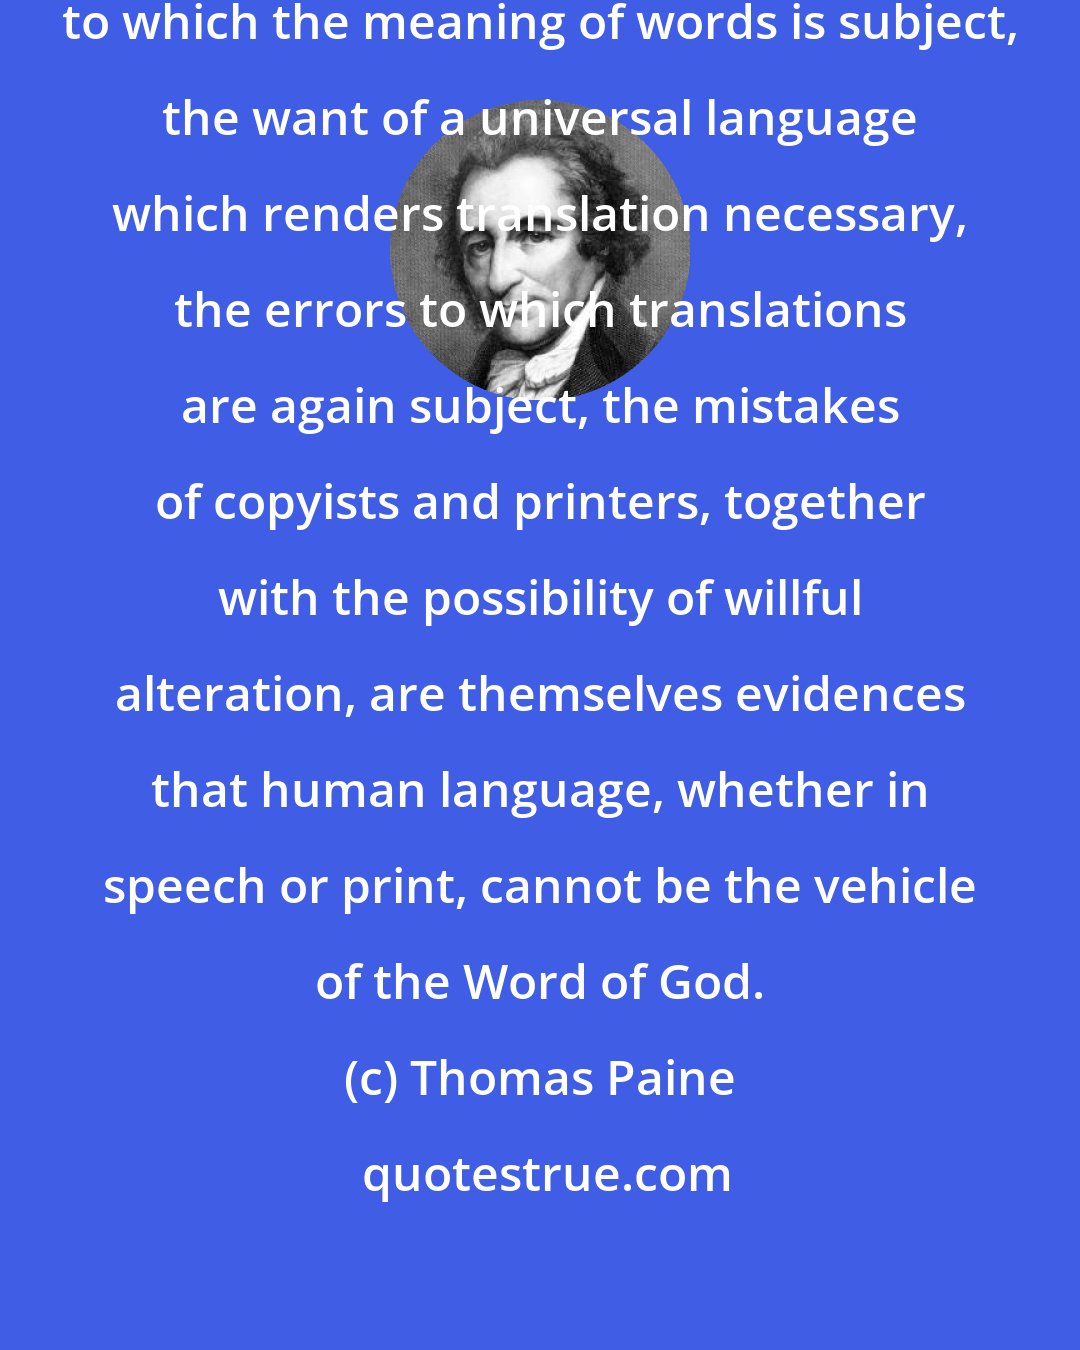 Thomas Paine: The continually progressive change to which the meaning of words is subject, the want of a universal language which renders translation necessary, the errors to which translations are again subject, the mistakes of copyists and printers, together with the possibility of willful alteration, are themselves evidences that human language, whether in speech or print, cannot be the vehicle of the Word of God.